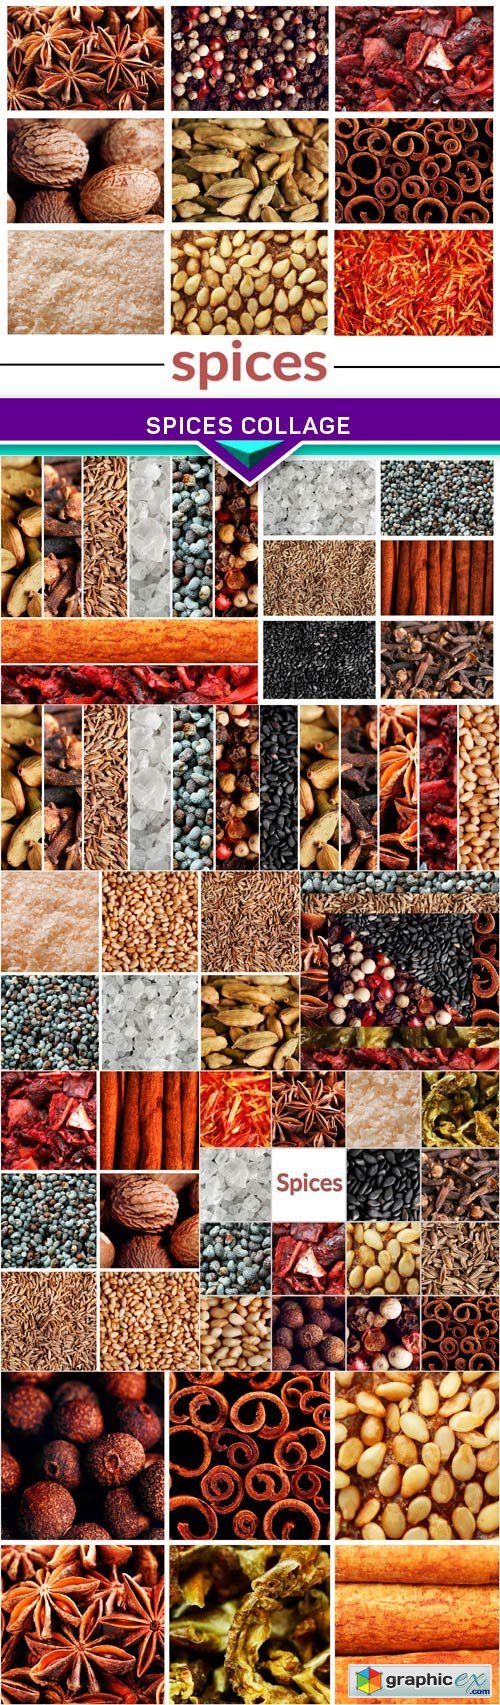 Spices collage 10x JPEG